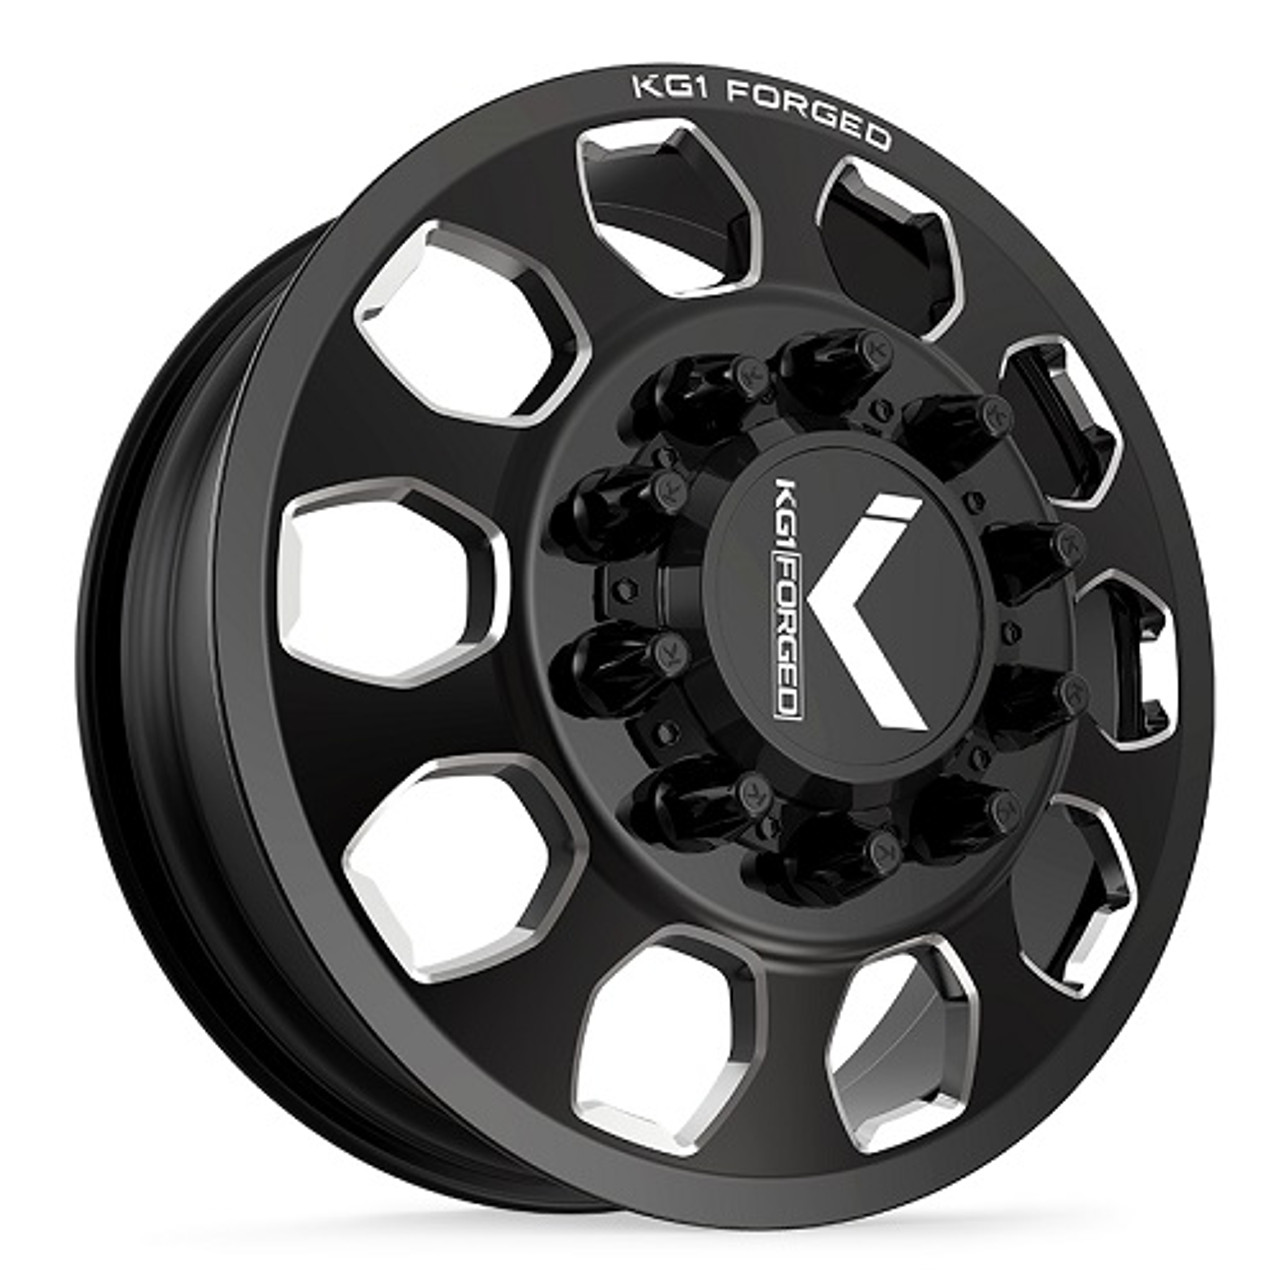 22 x 8.25 KG1 Forged KD003 Sarge Gloss Black/Machined